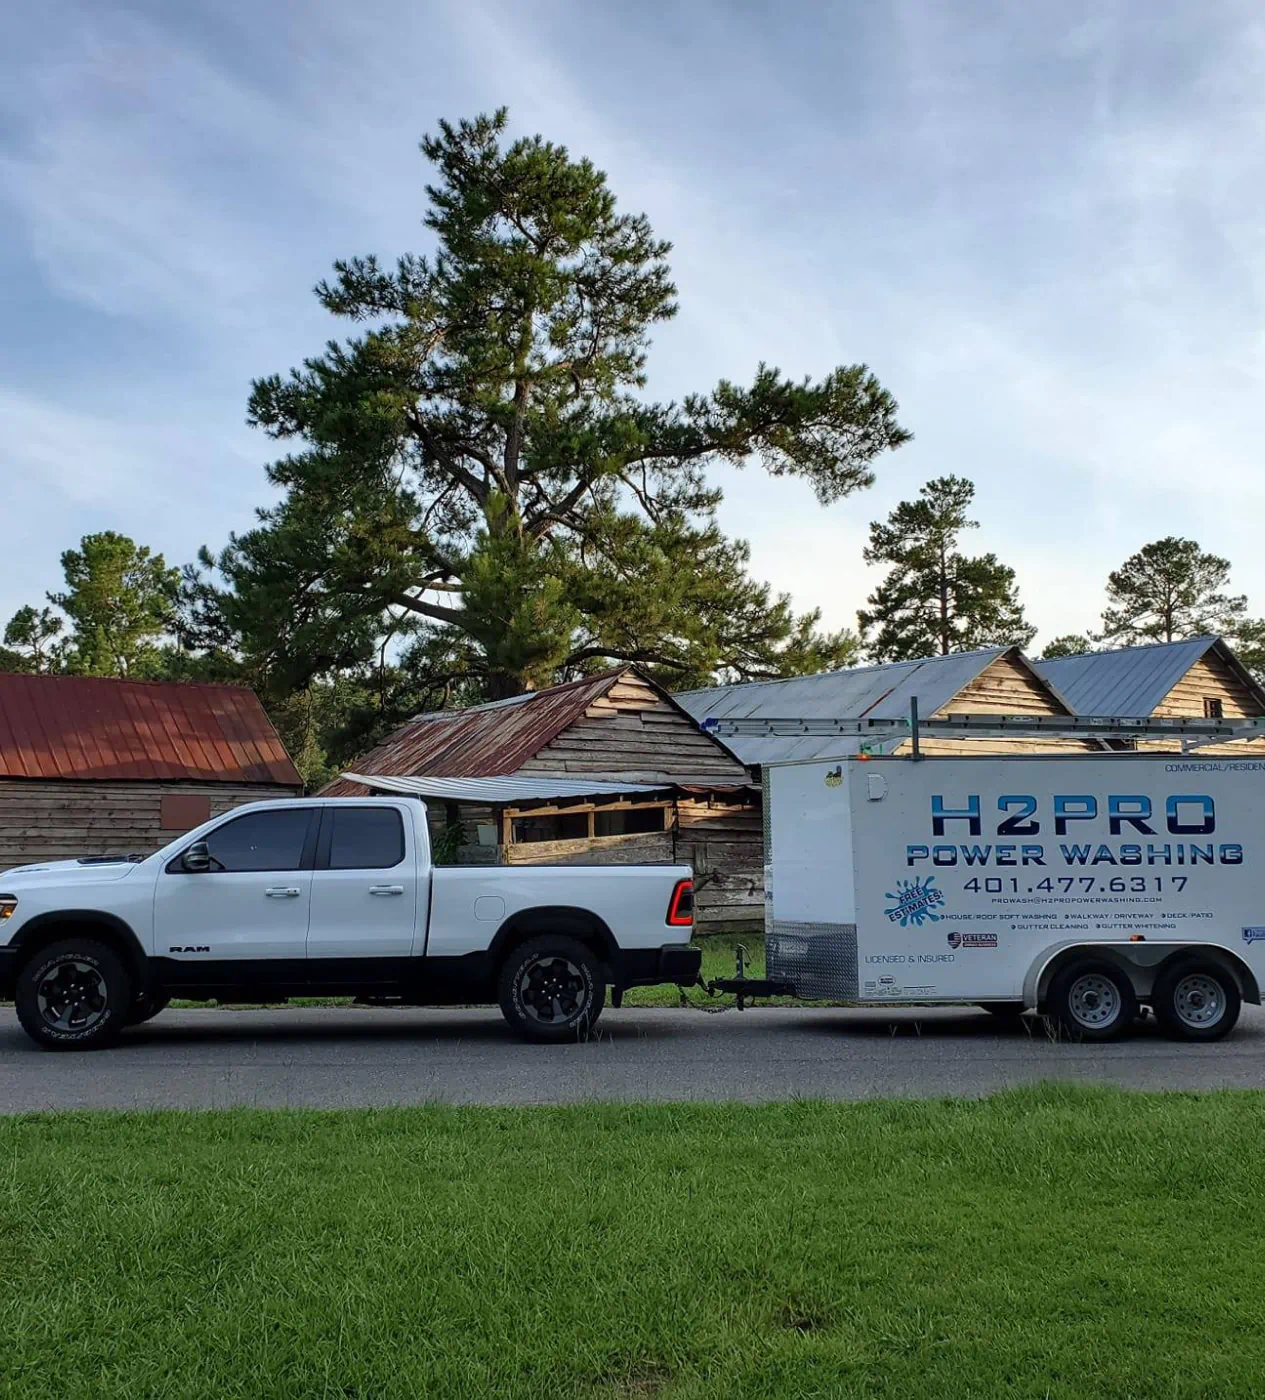 h20 pro vehicle and trailer